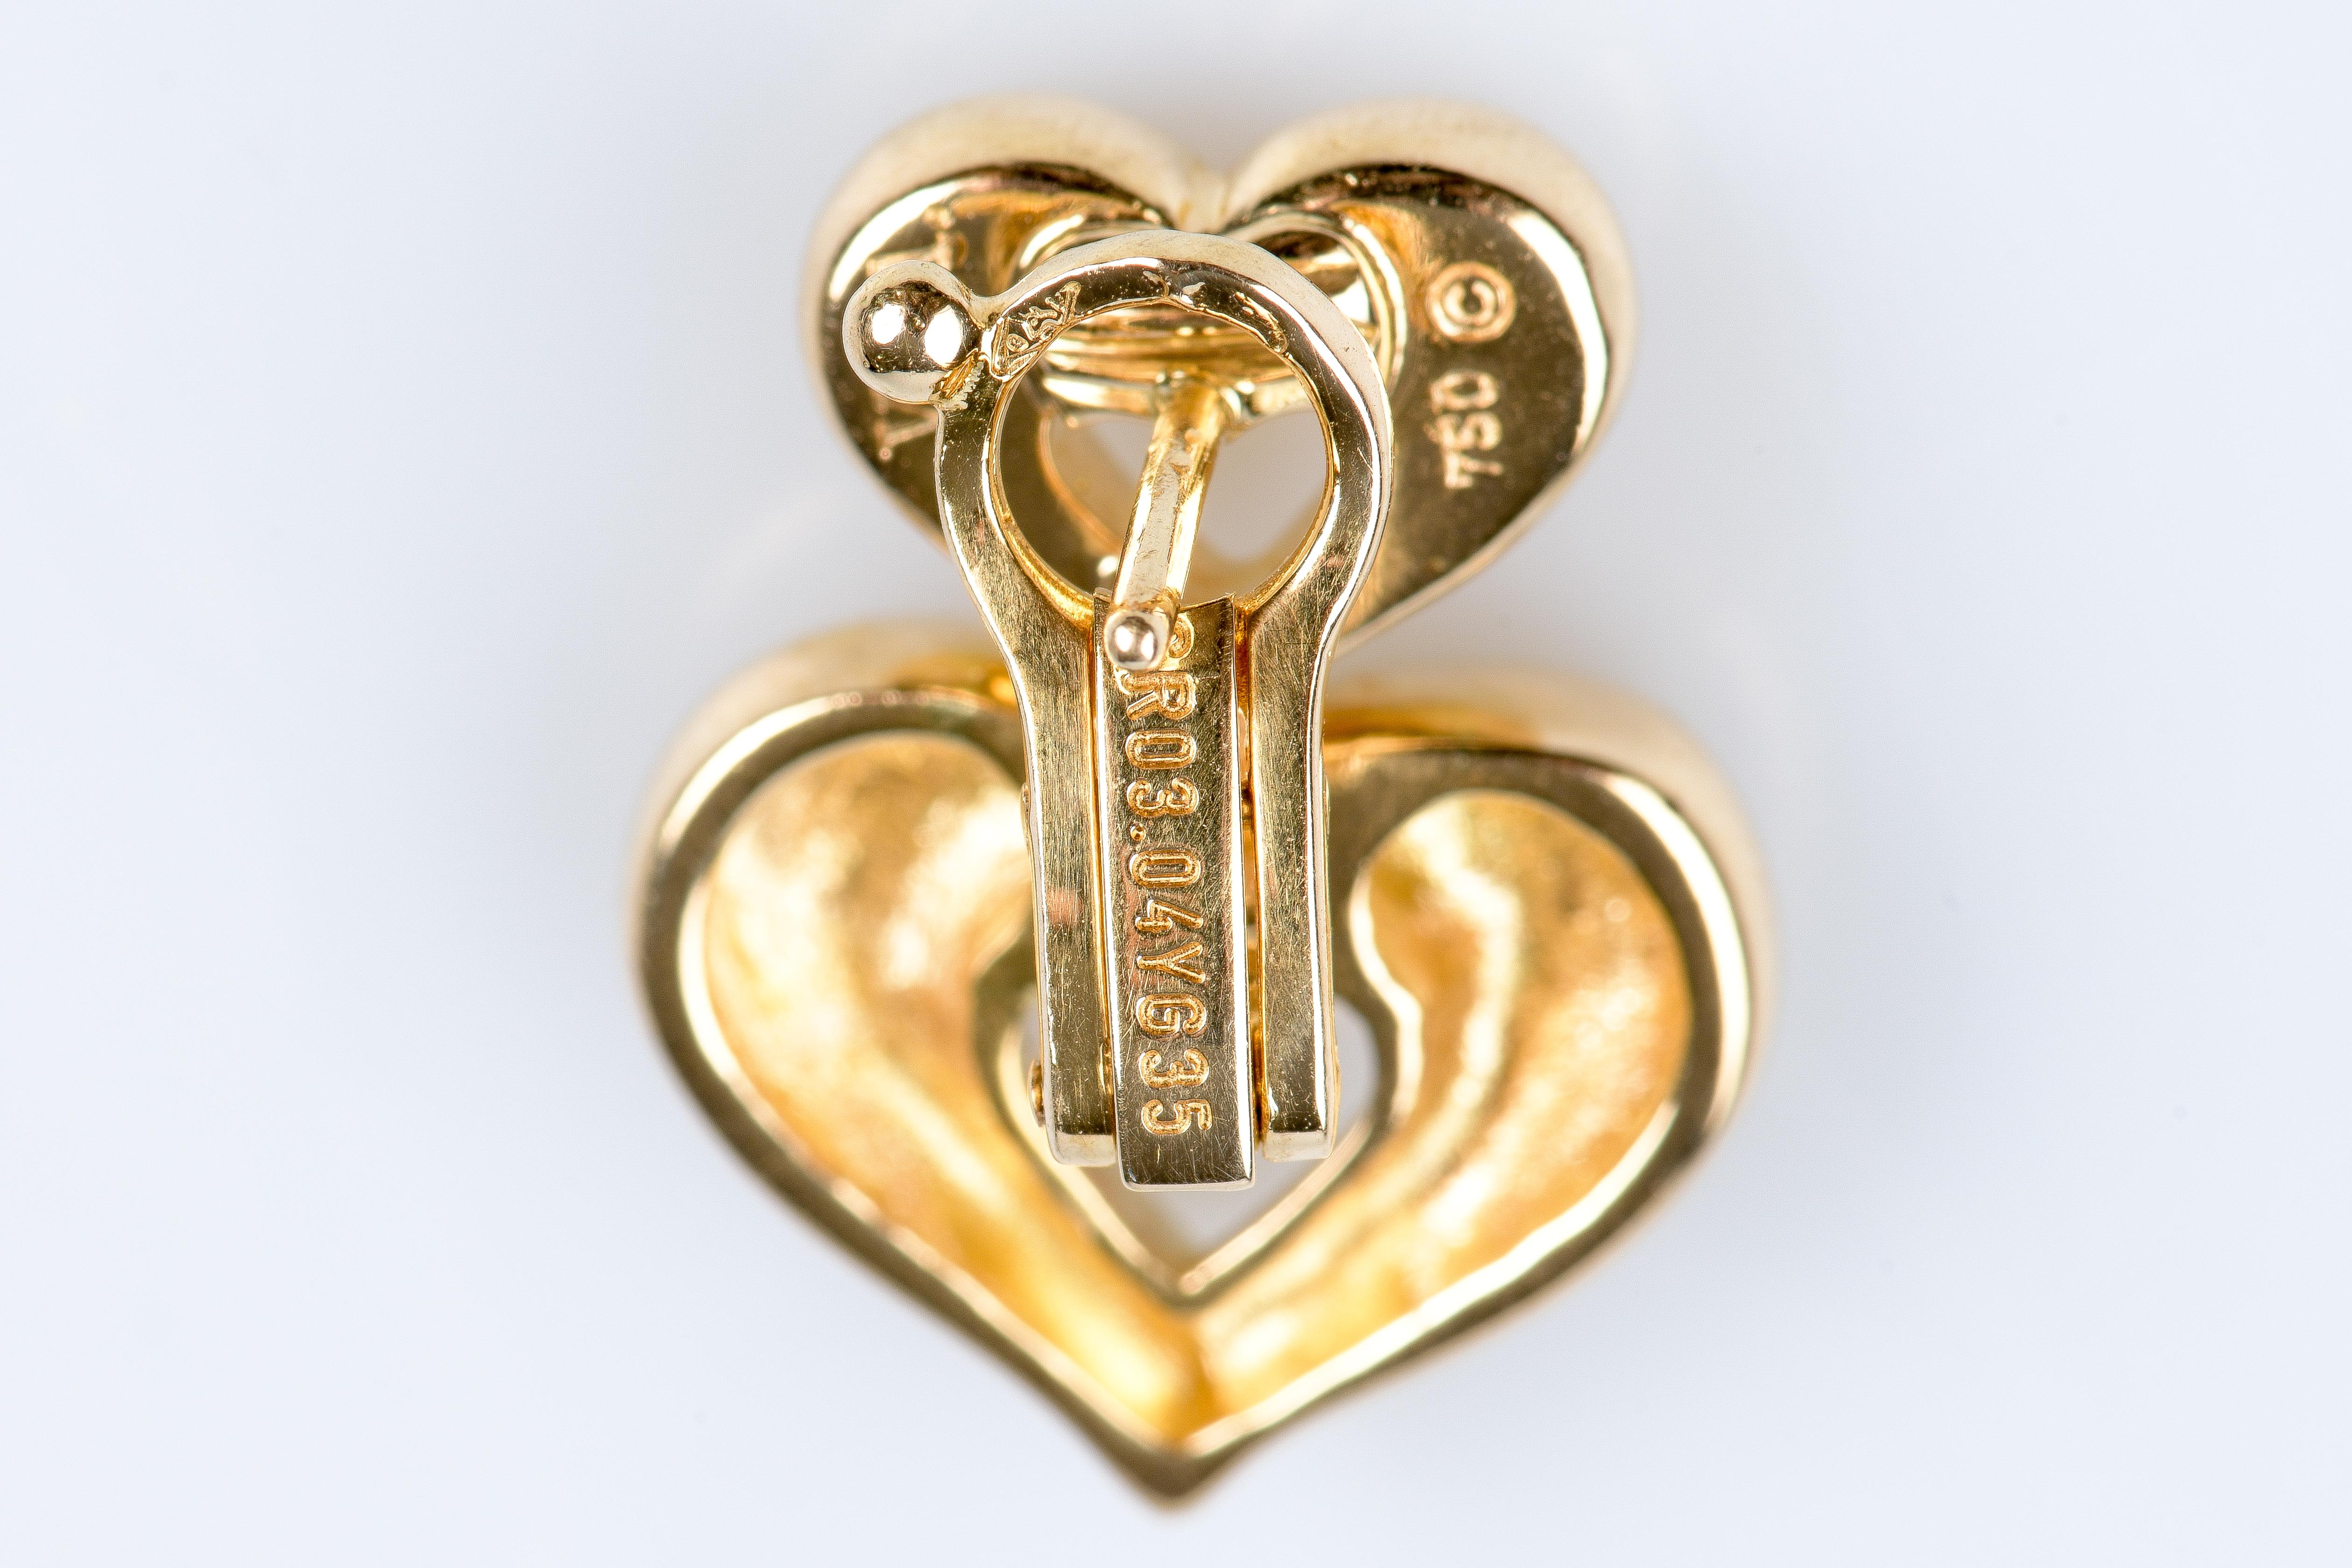 VCA Heart Shaped Earrings in 18K Gold. Each earring has two smooth, polished hearts with rounded edges. The second heart hangs on the first adding an extra touch of romance to this already charming jewel. 

Weight: 16.70 gr. 

Dimensions: 1.6cm x